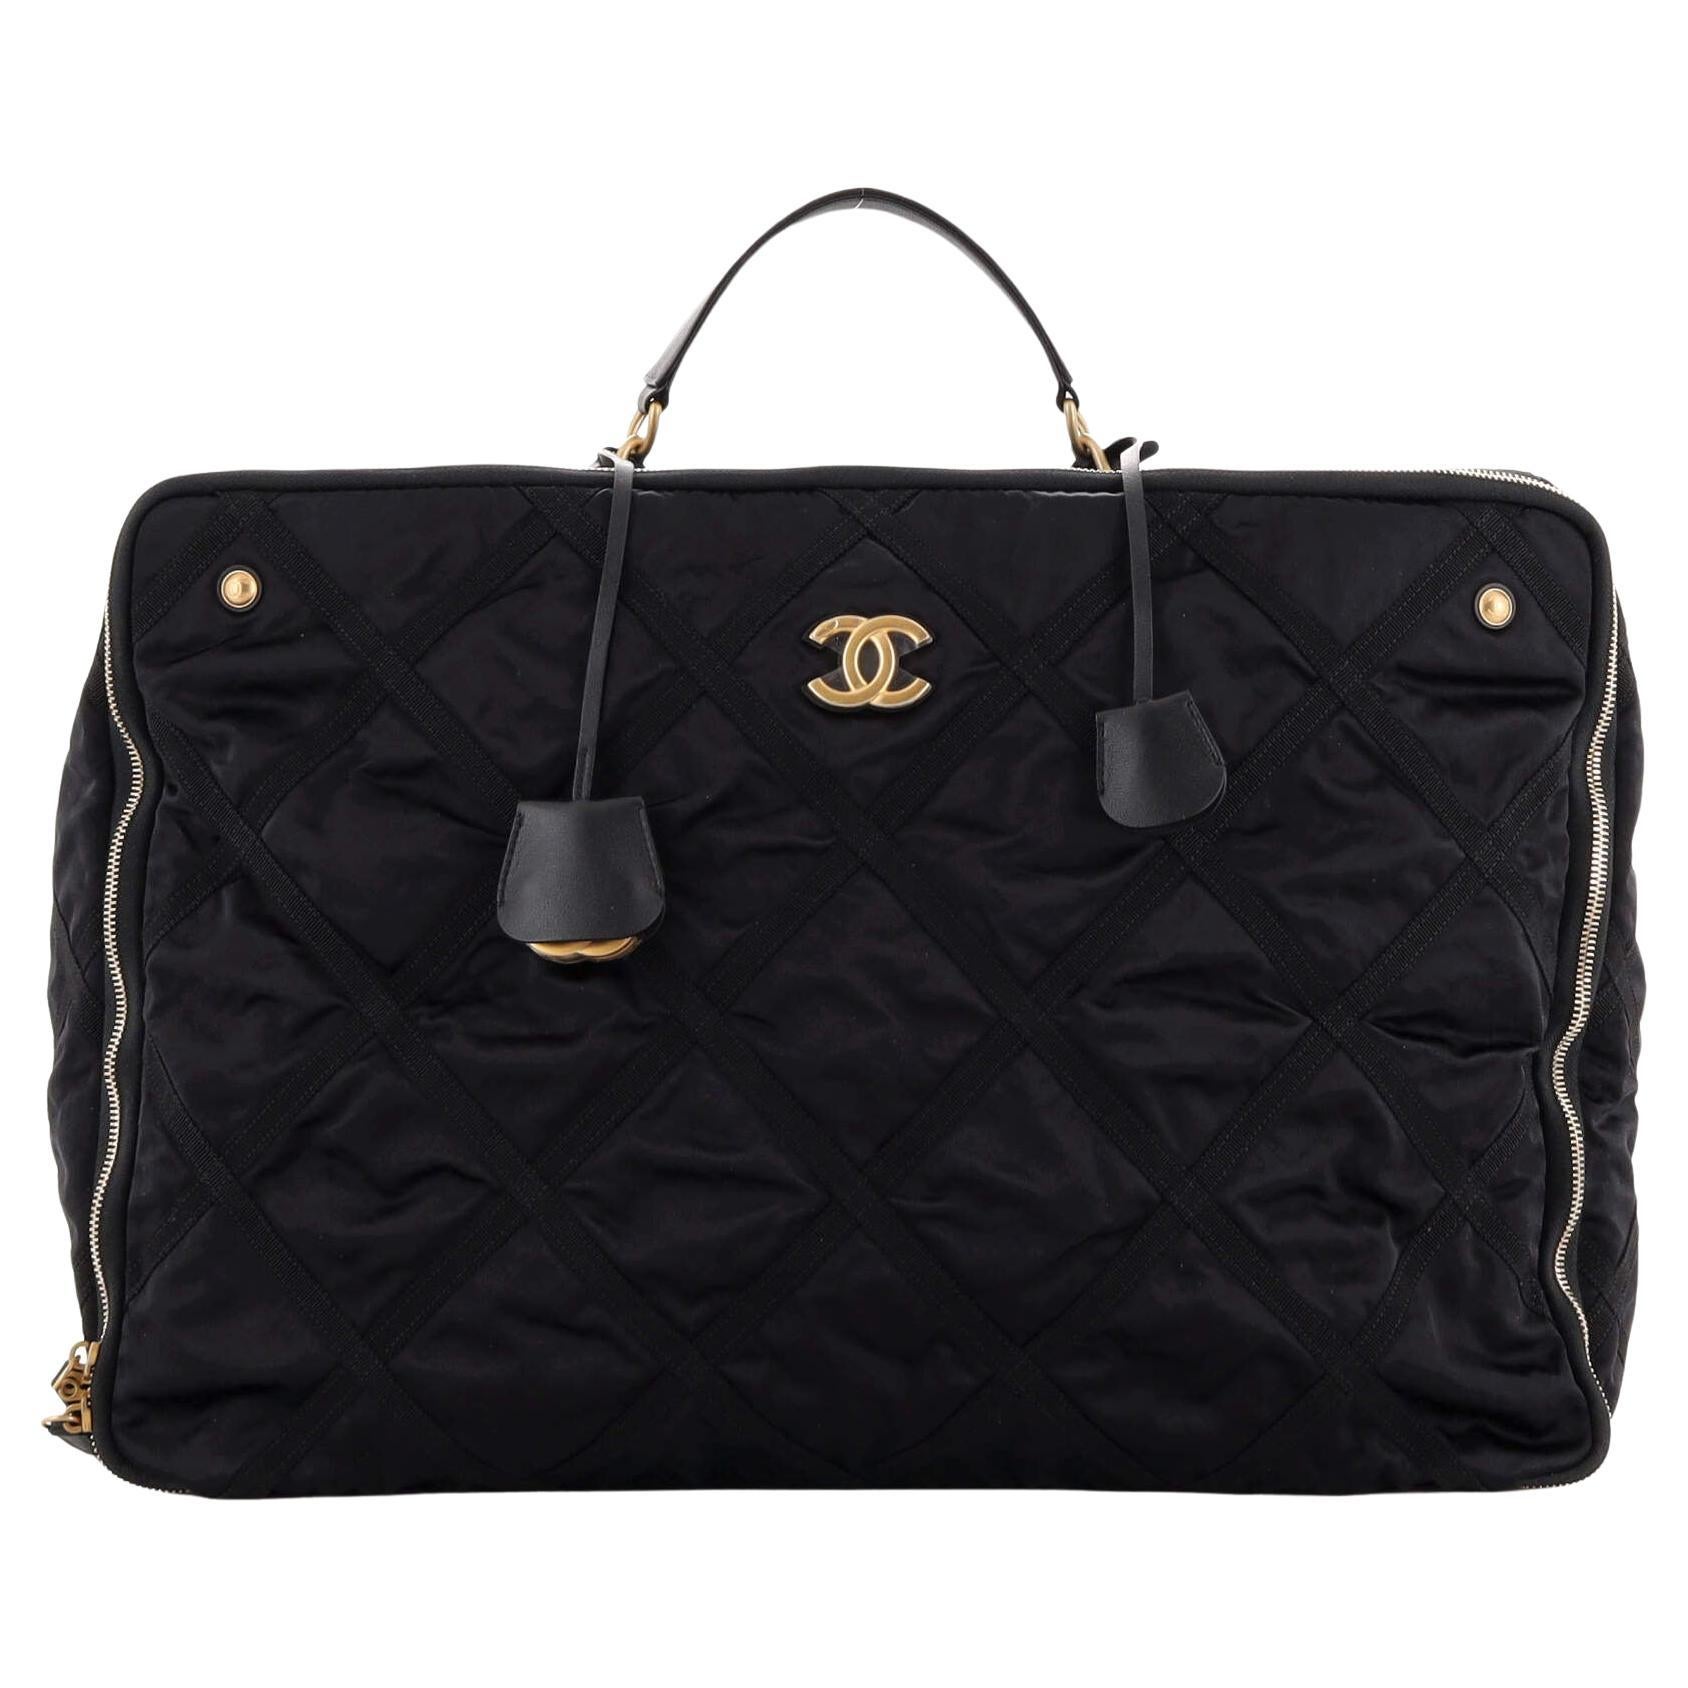 Chanel Lifestyle Travel Handbag Quilted Nylon with Grosgrain Large Black  2310701